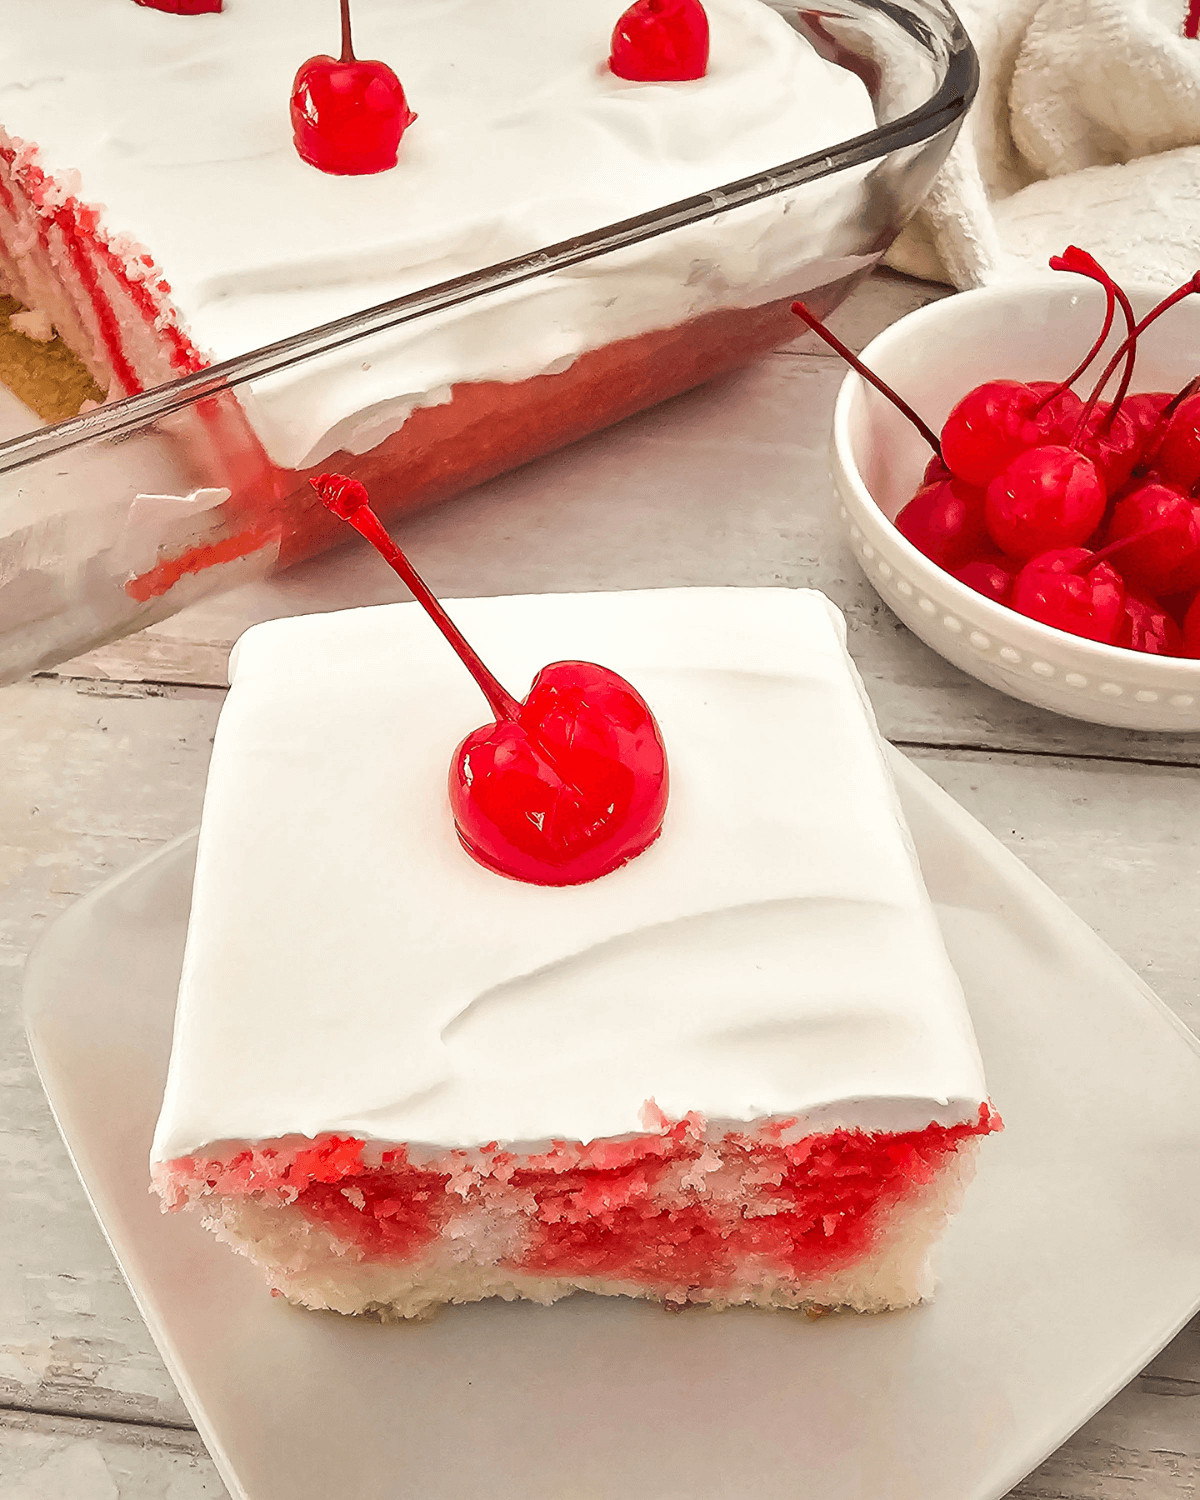 A slice of Cherry Poke Cake with a creamy white topping and a single cherry garnish, served on a white plate.